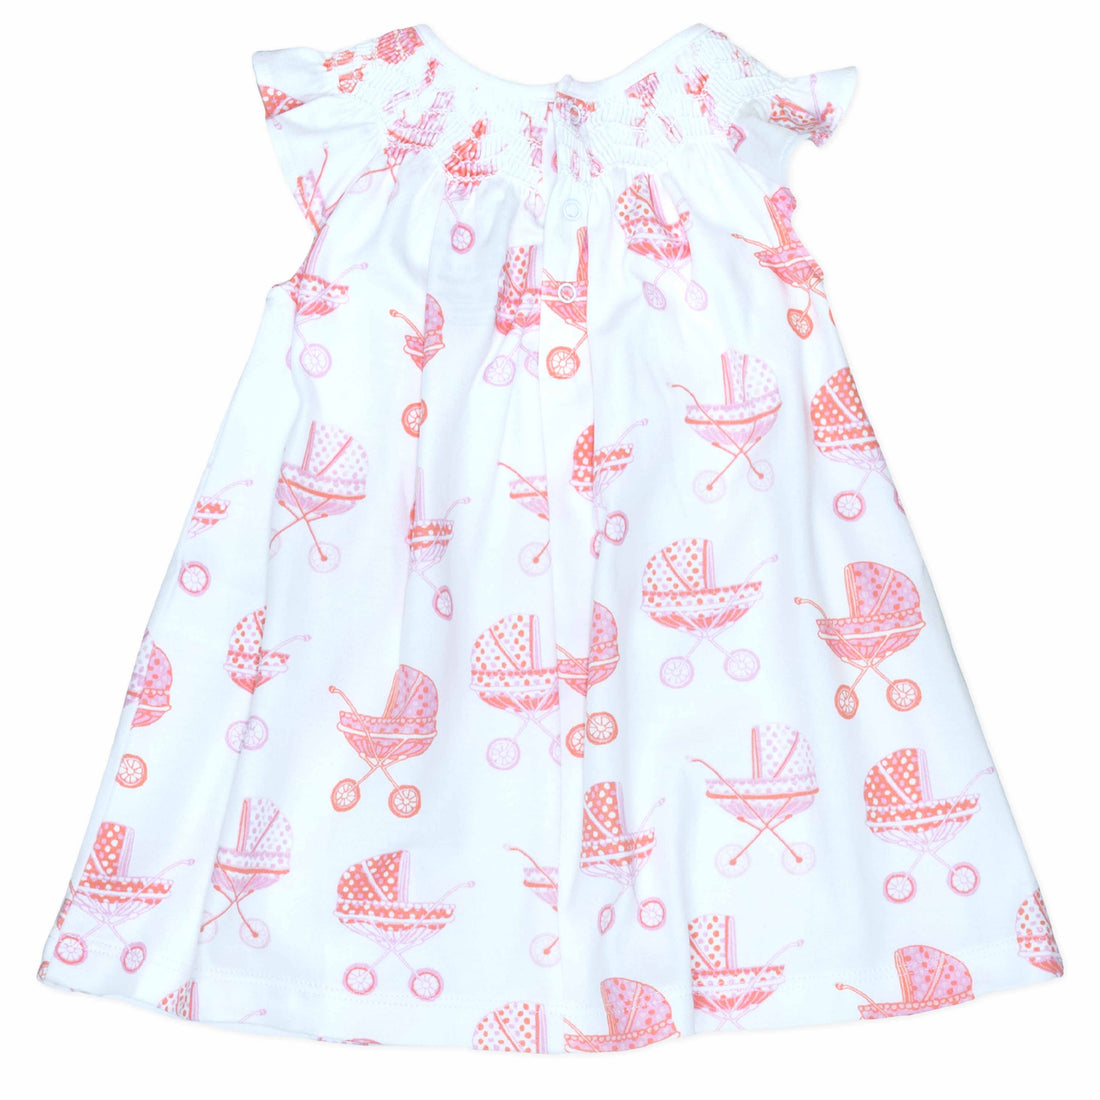 back view white girls dress with smock and vintage-inspired baby carriage pattern made in pima cotton